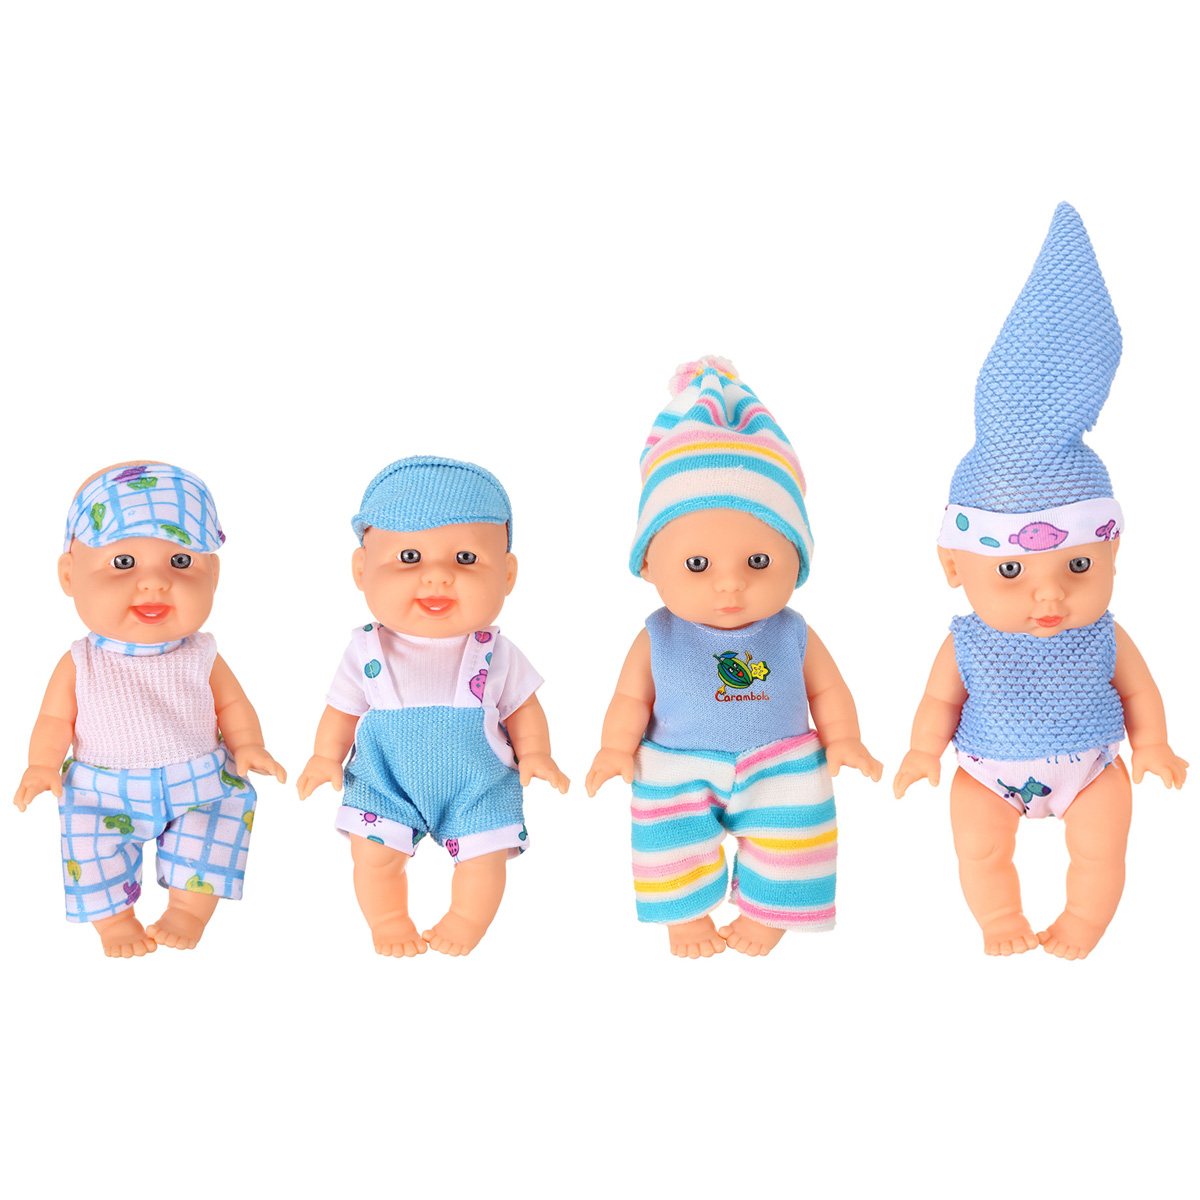 Simulation-Baby-3D-Creative-Cute-Doll-Play-House-Toy-Doll-Vinyl-Doll-Gift-1818656-6